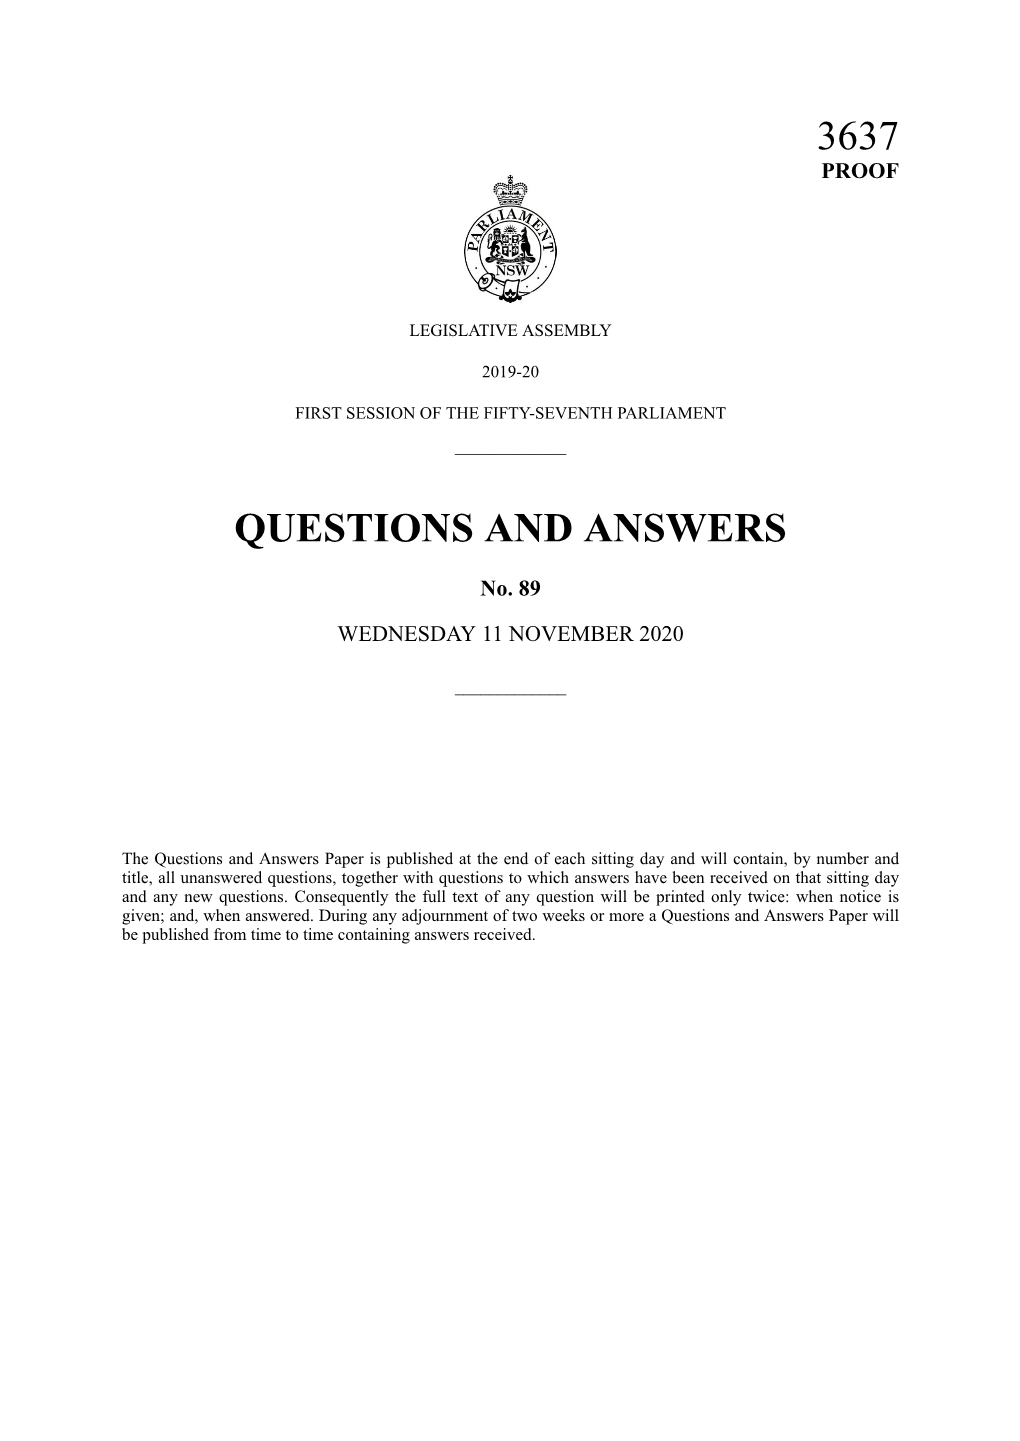 Questions & Answers Paper No. 89